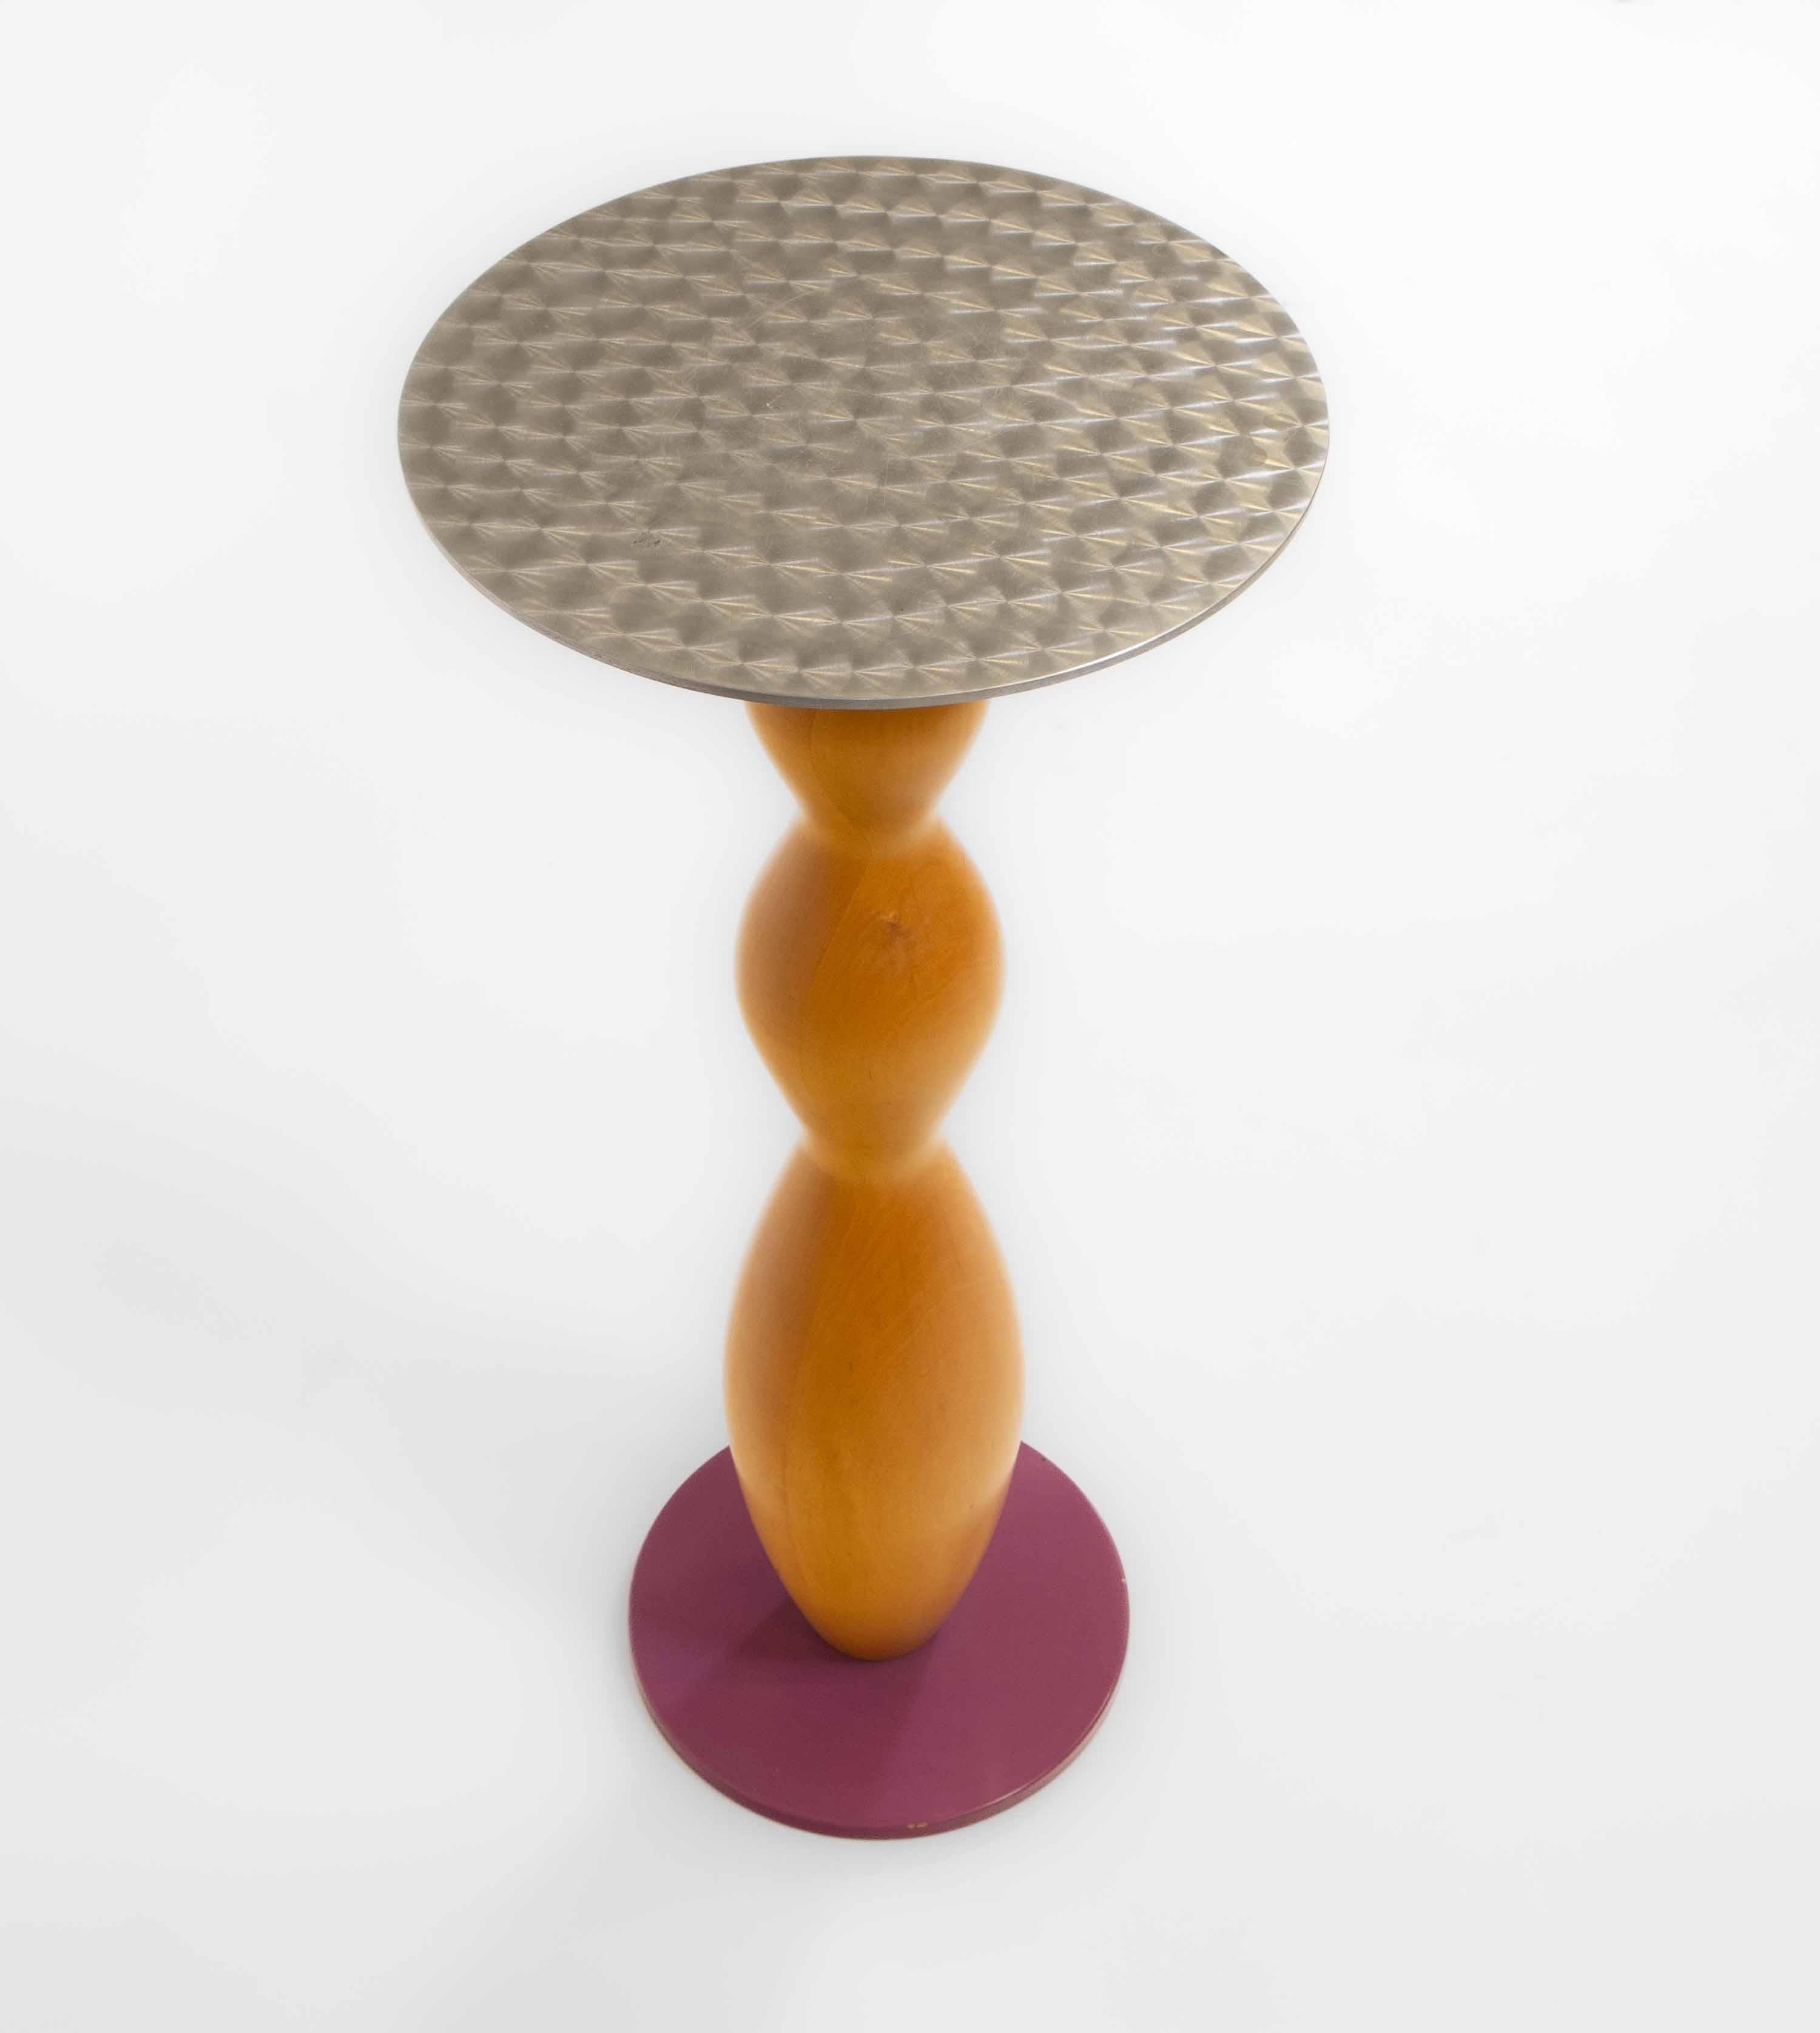 A Cleopatra side table designed by Marco Zanuso Jr in 1987 for Memphis Milano. Applied metal manufacturer's label 